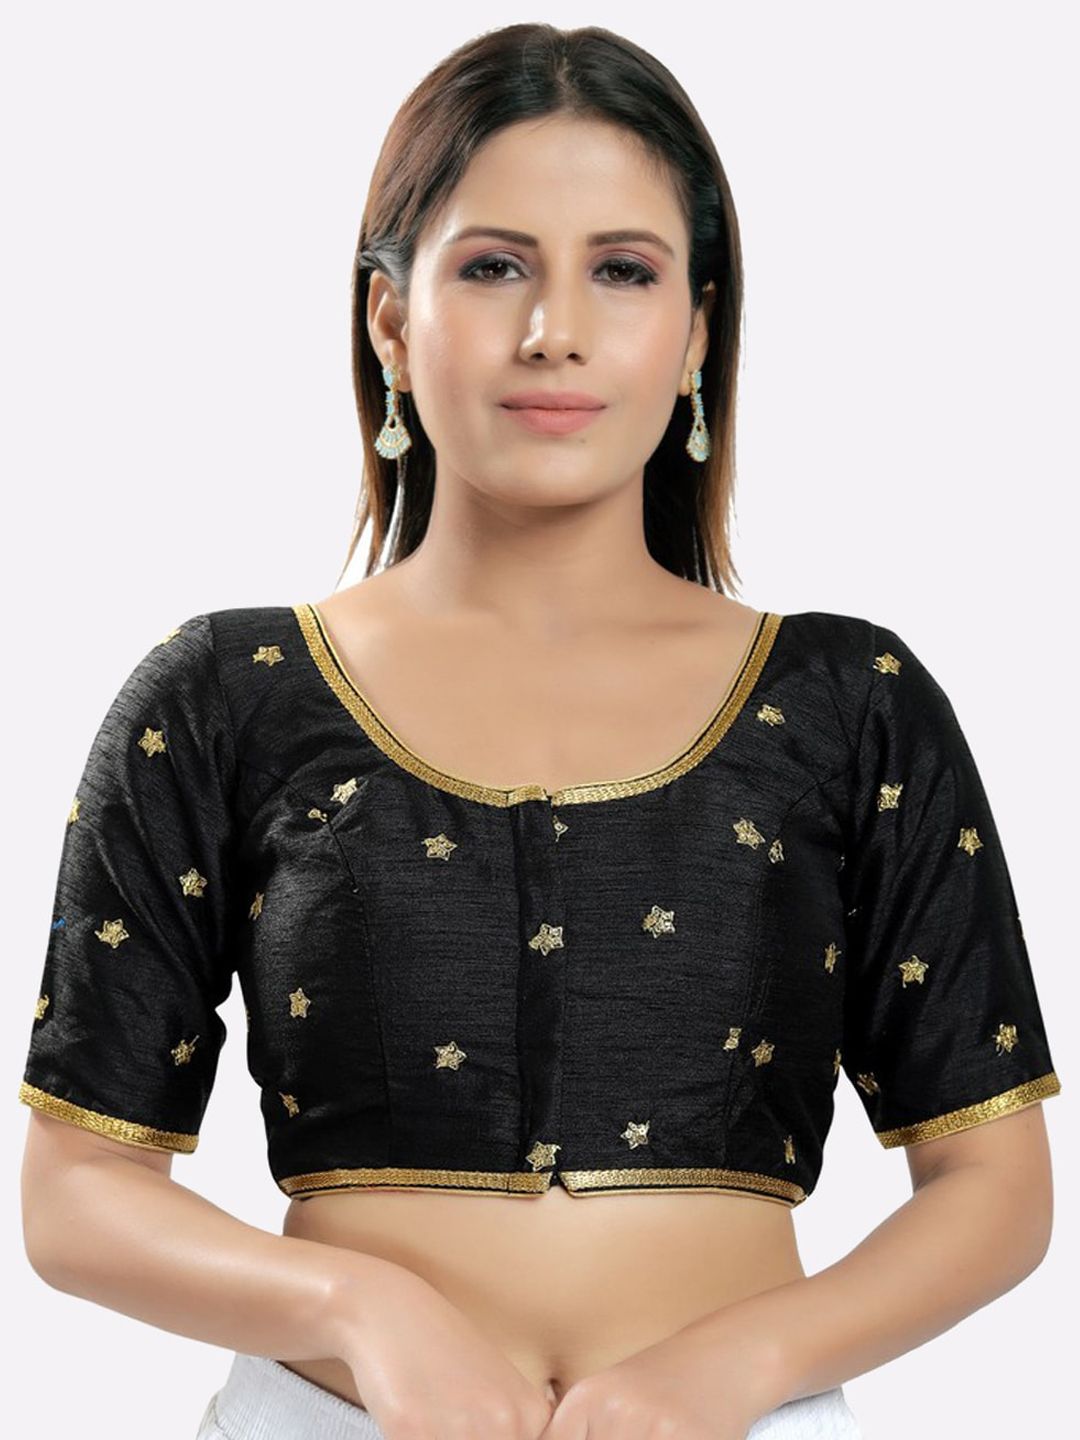 SALWAR STUDIO Women Black & Gold-Toned Embroidered Saree Blouse Price in India